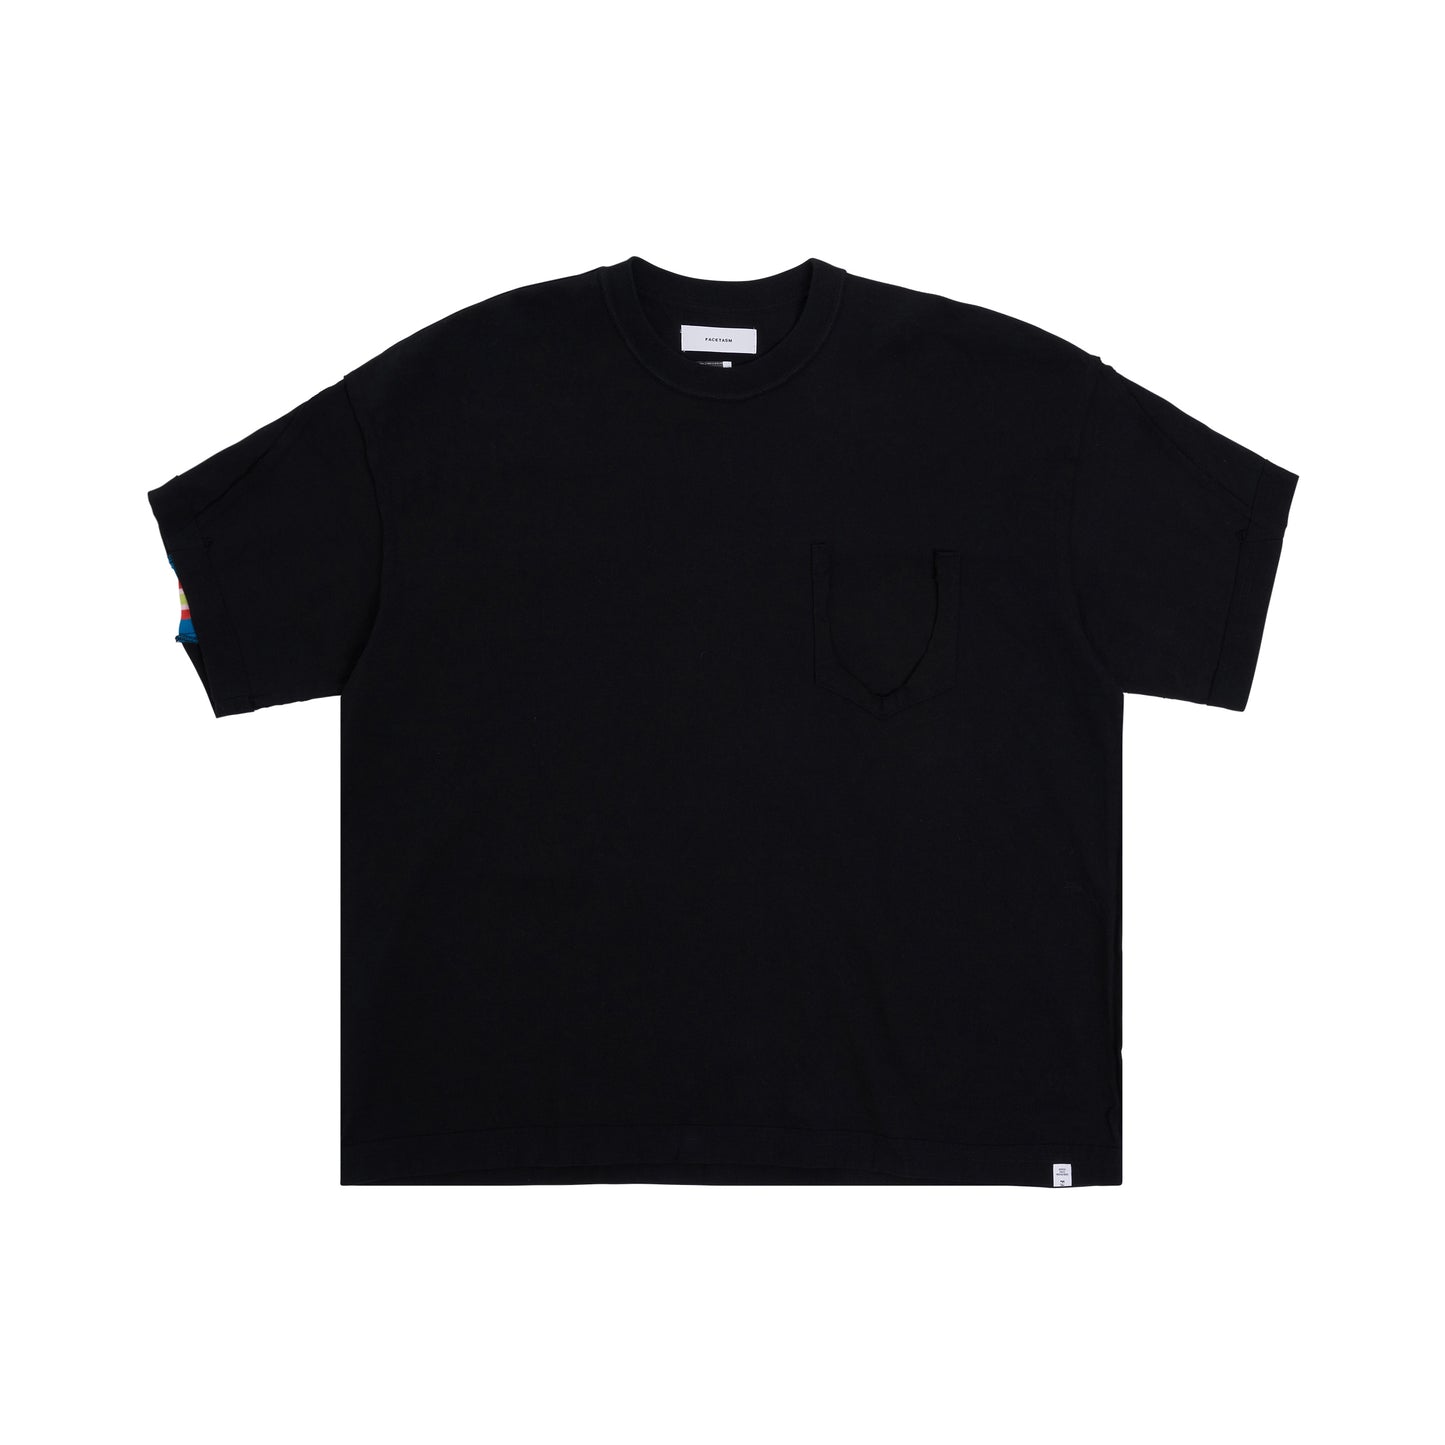 Inside-Out Rib Big T-Shirt with Destroyed Pocket in Black